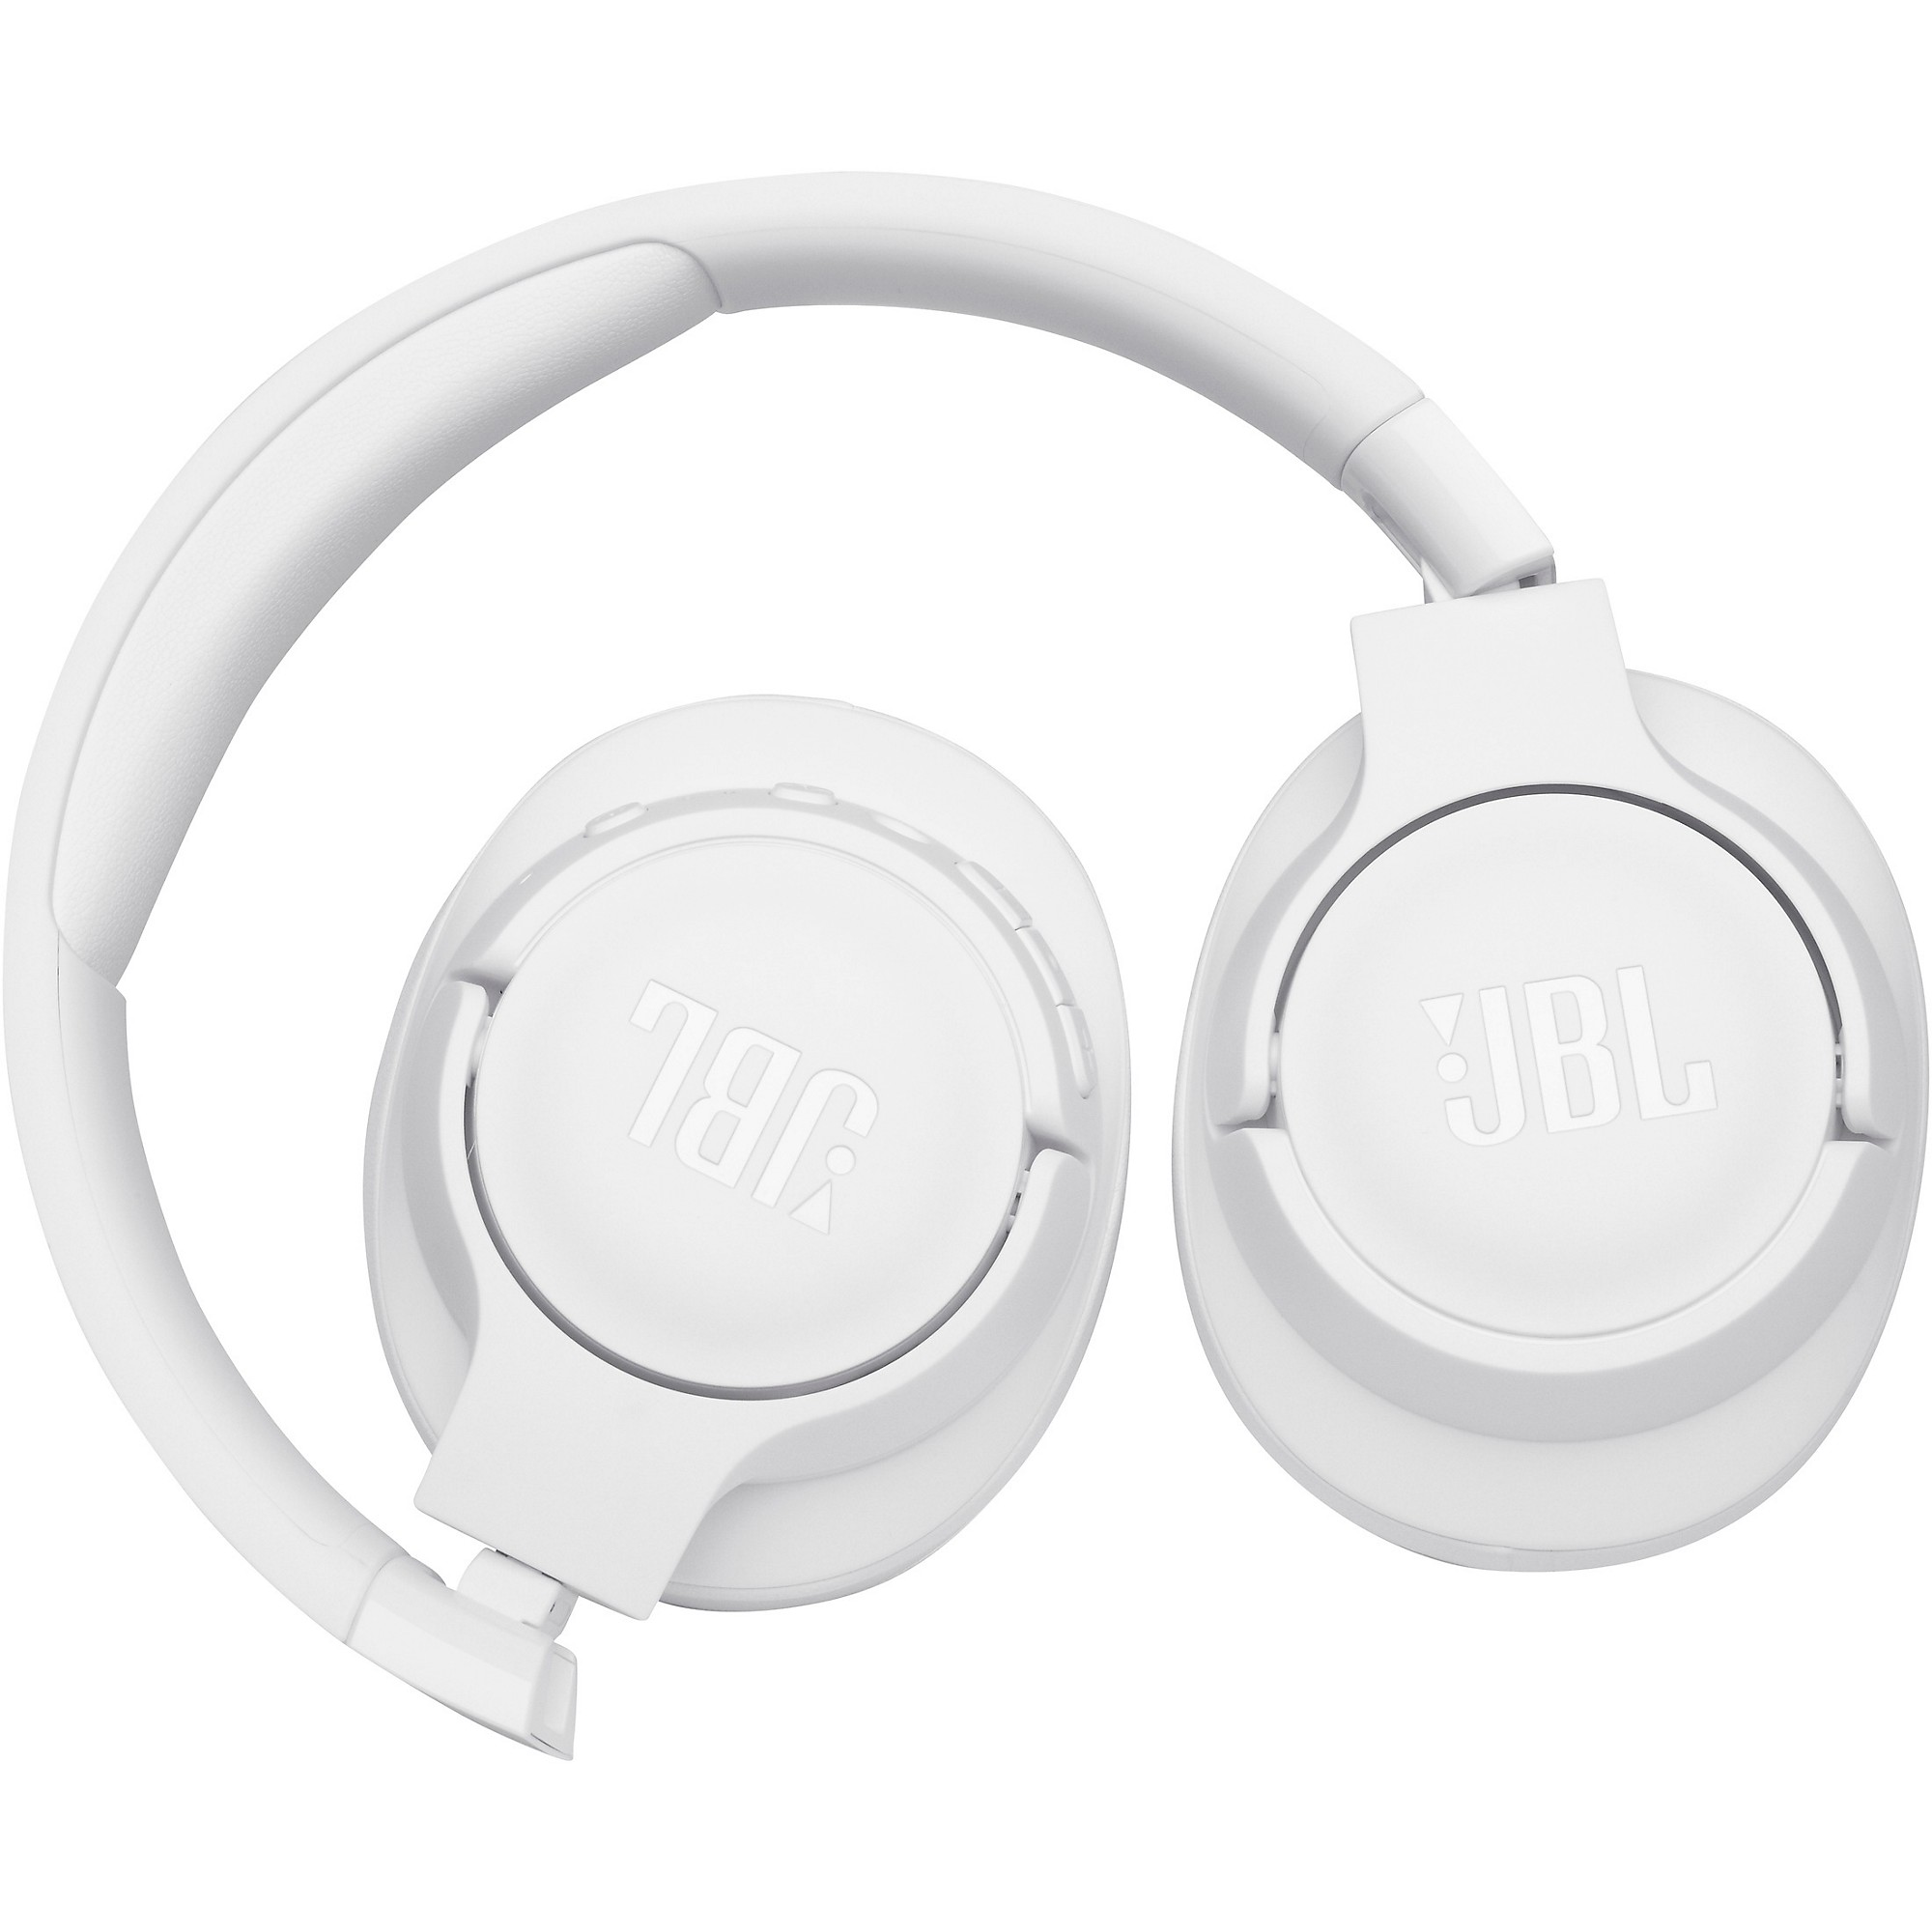 JBL Tune 760NC wireless headphones feature powerful JBL Pure Bass Sound and  active noise cancelling for punchy bass and an immersive audio experience.  